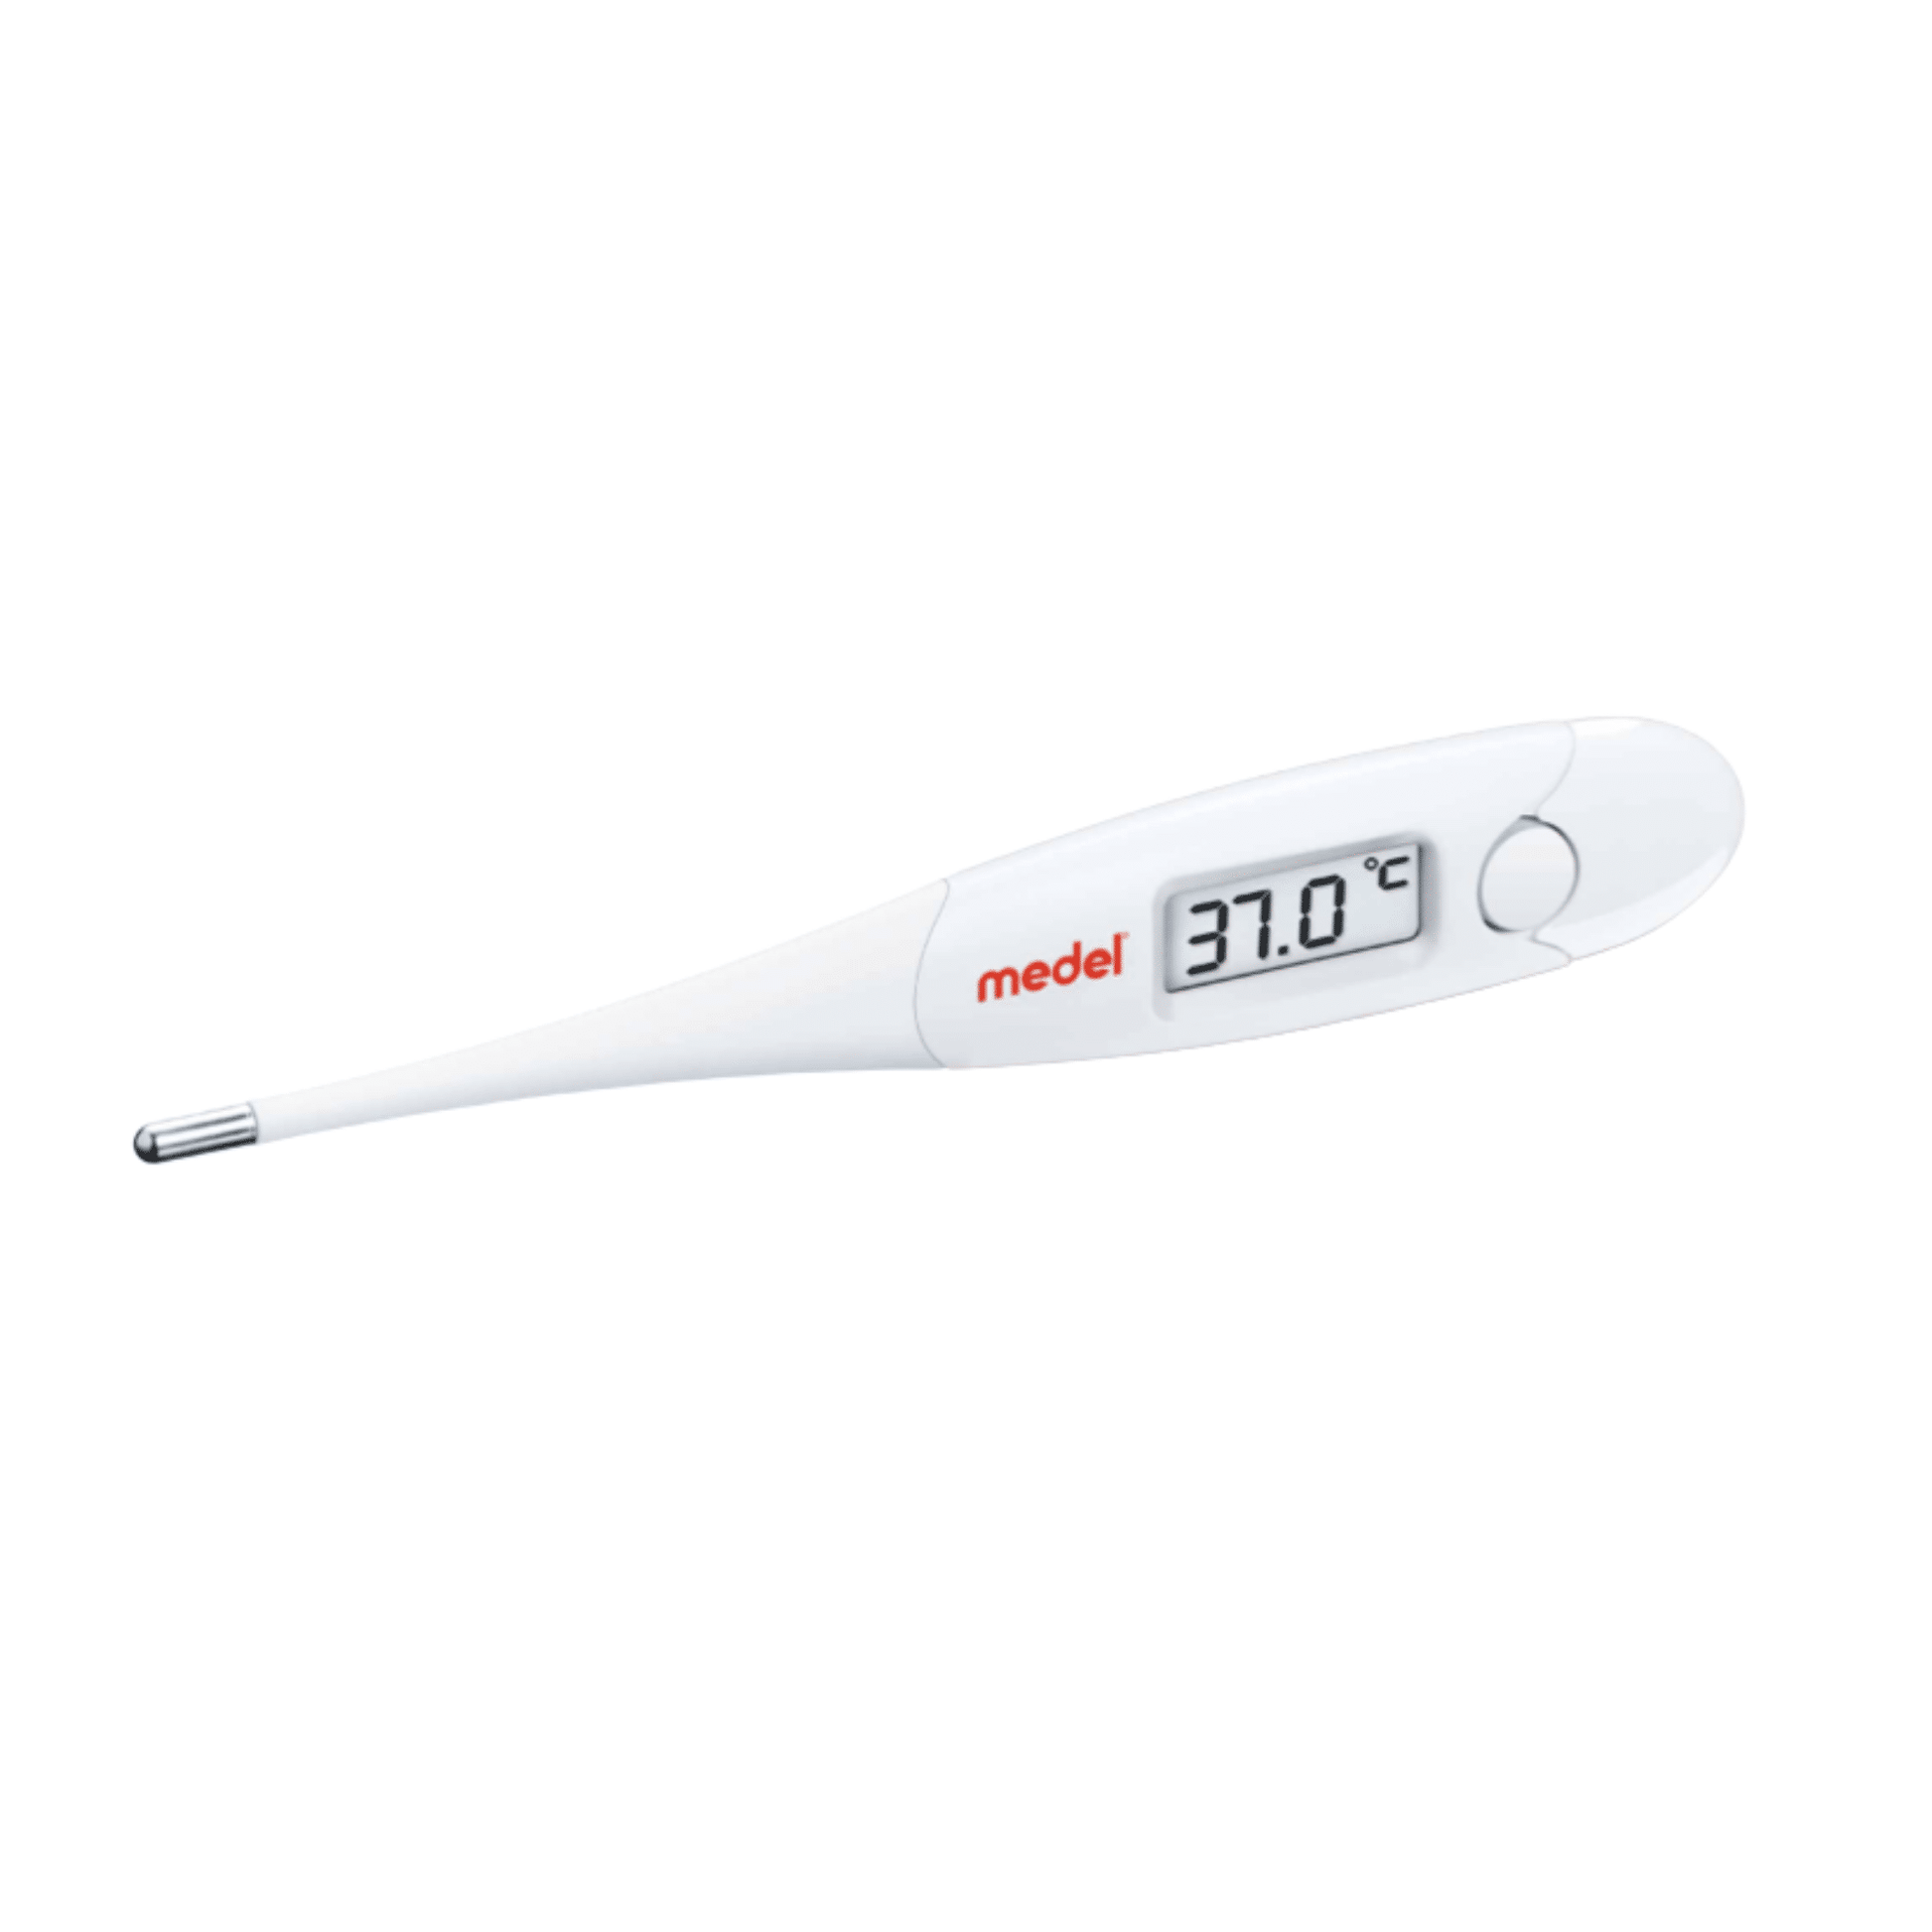 Medel Digital Express clinical thermometer